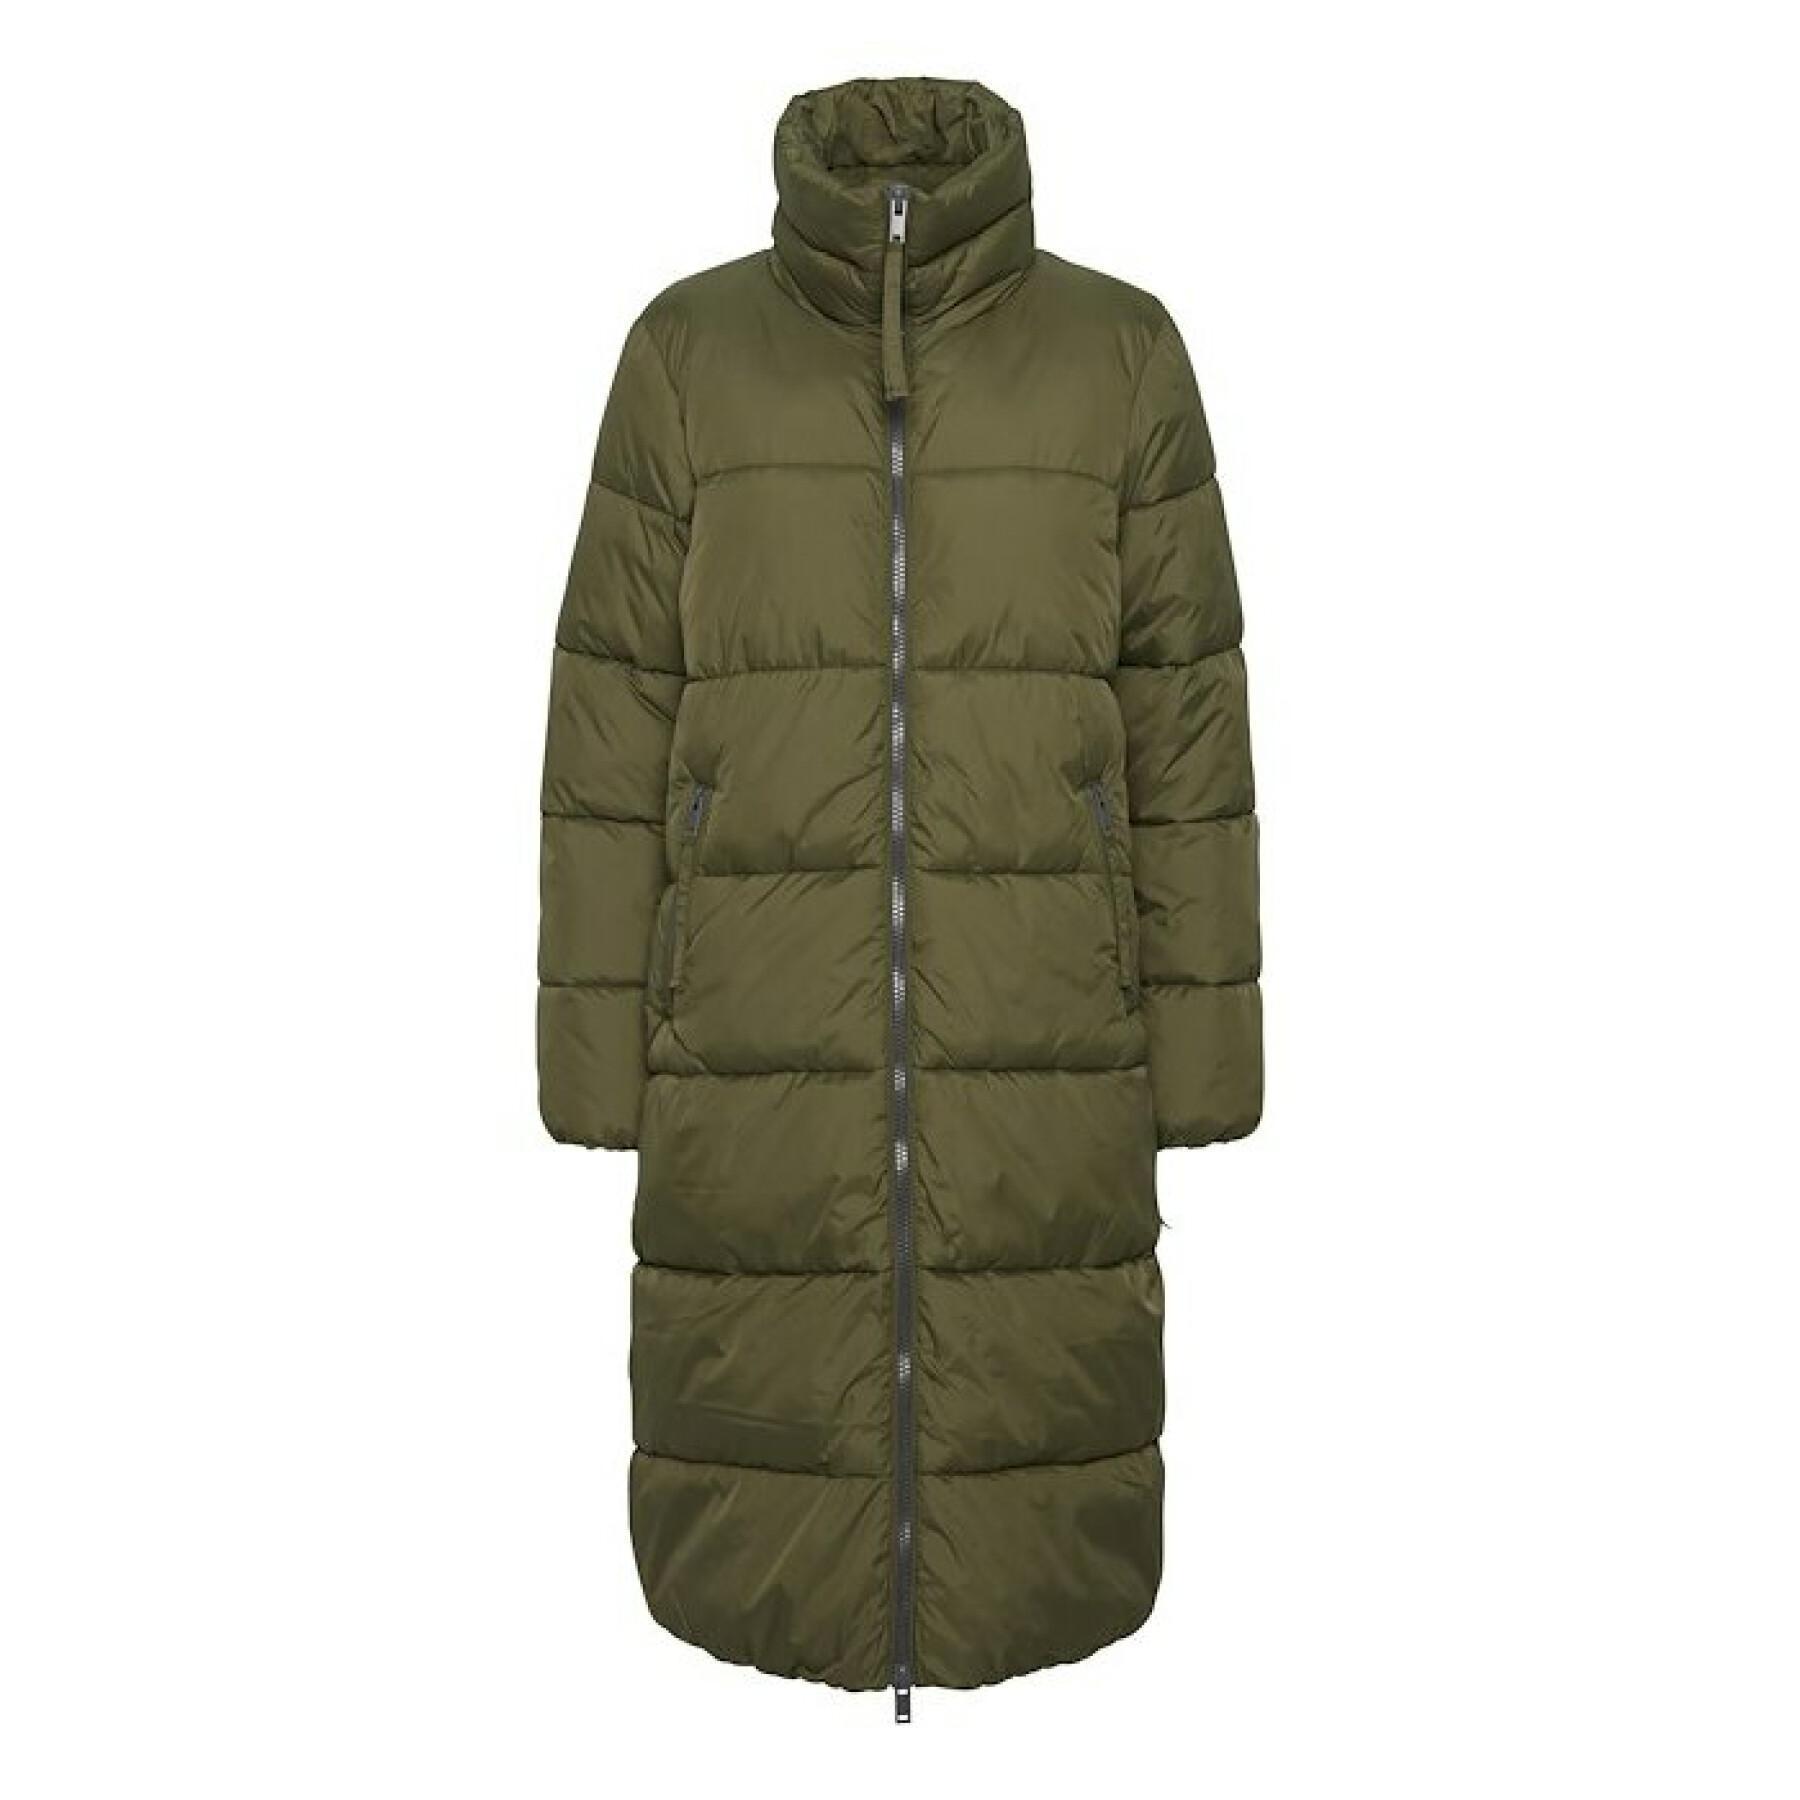 Women's parka b.young Bybomina